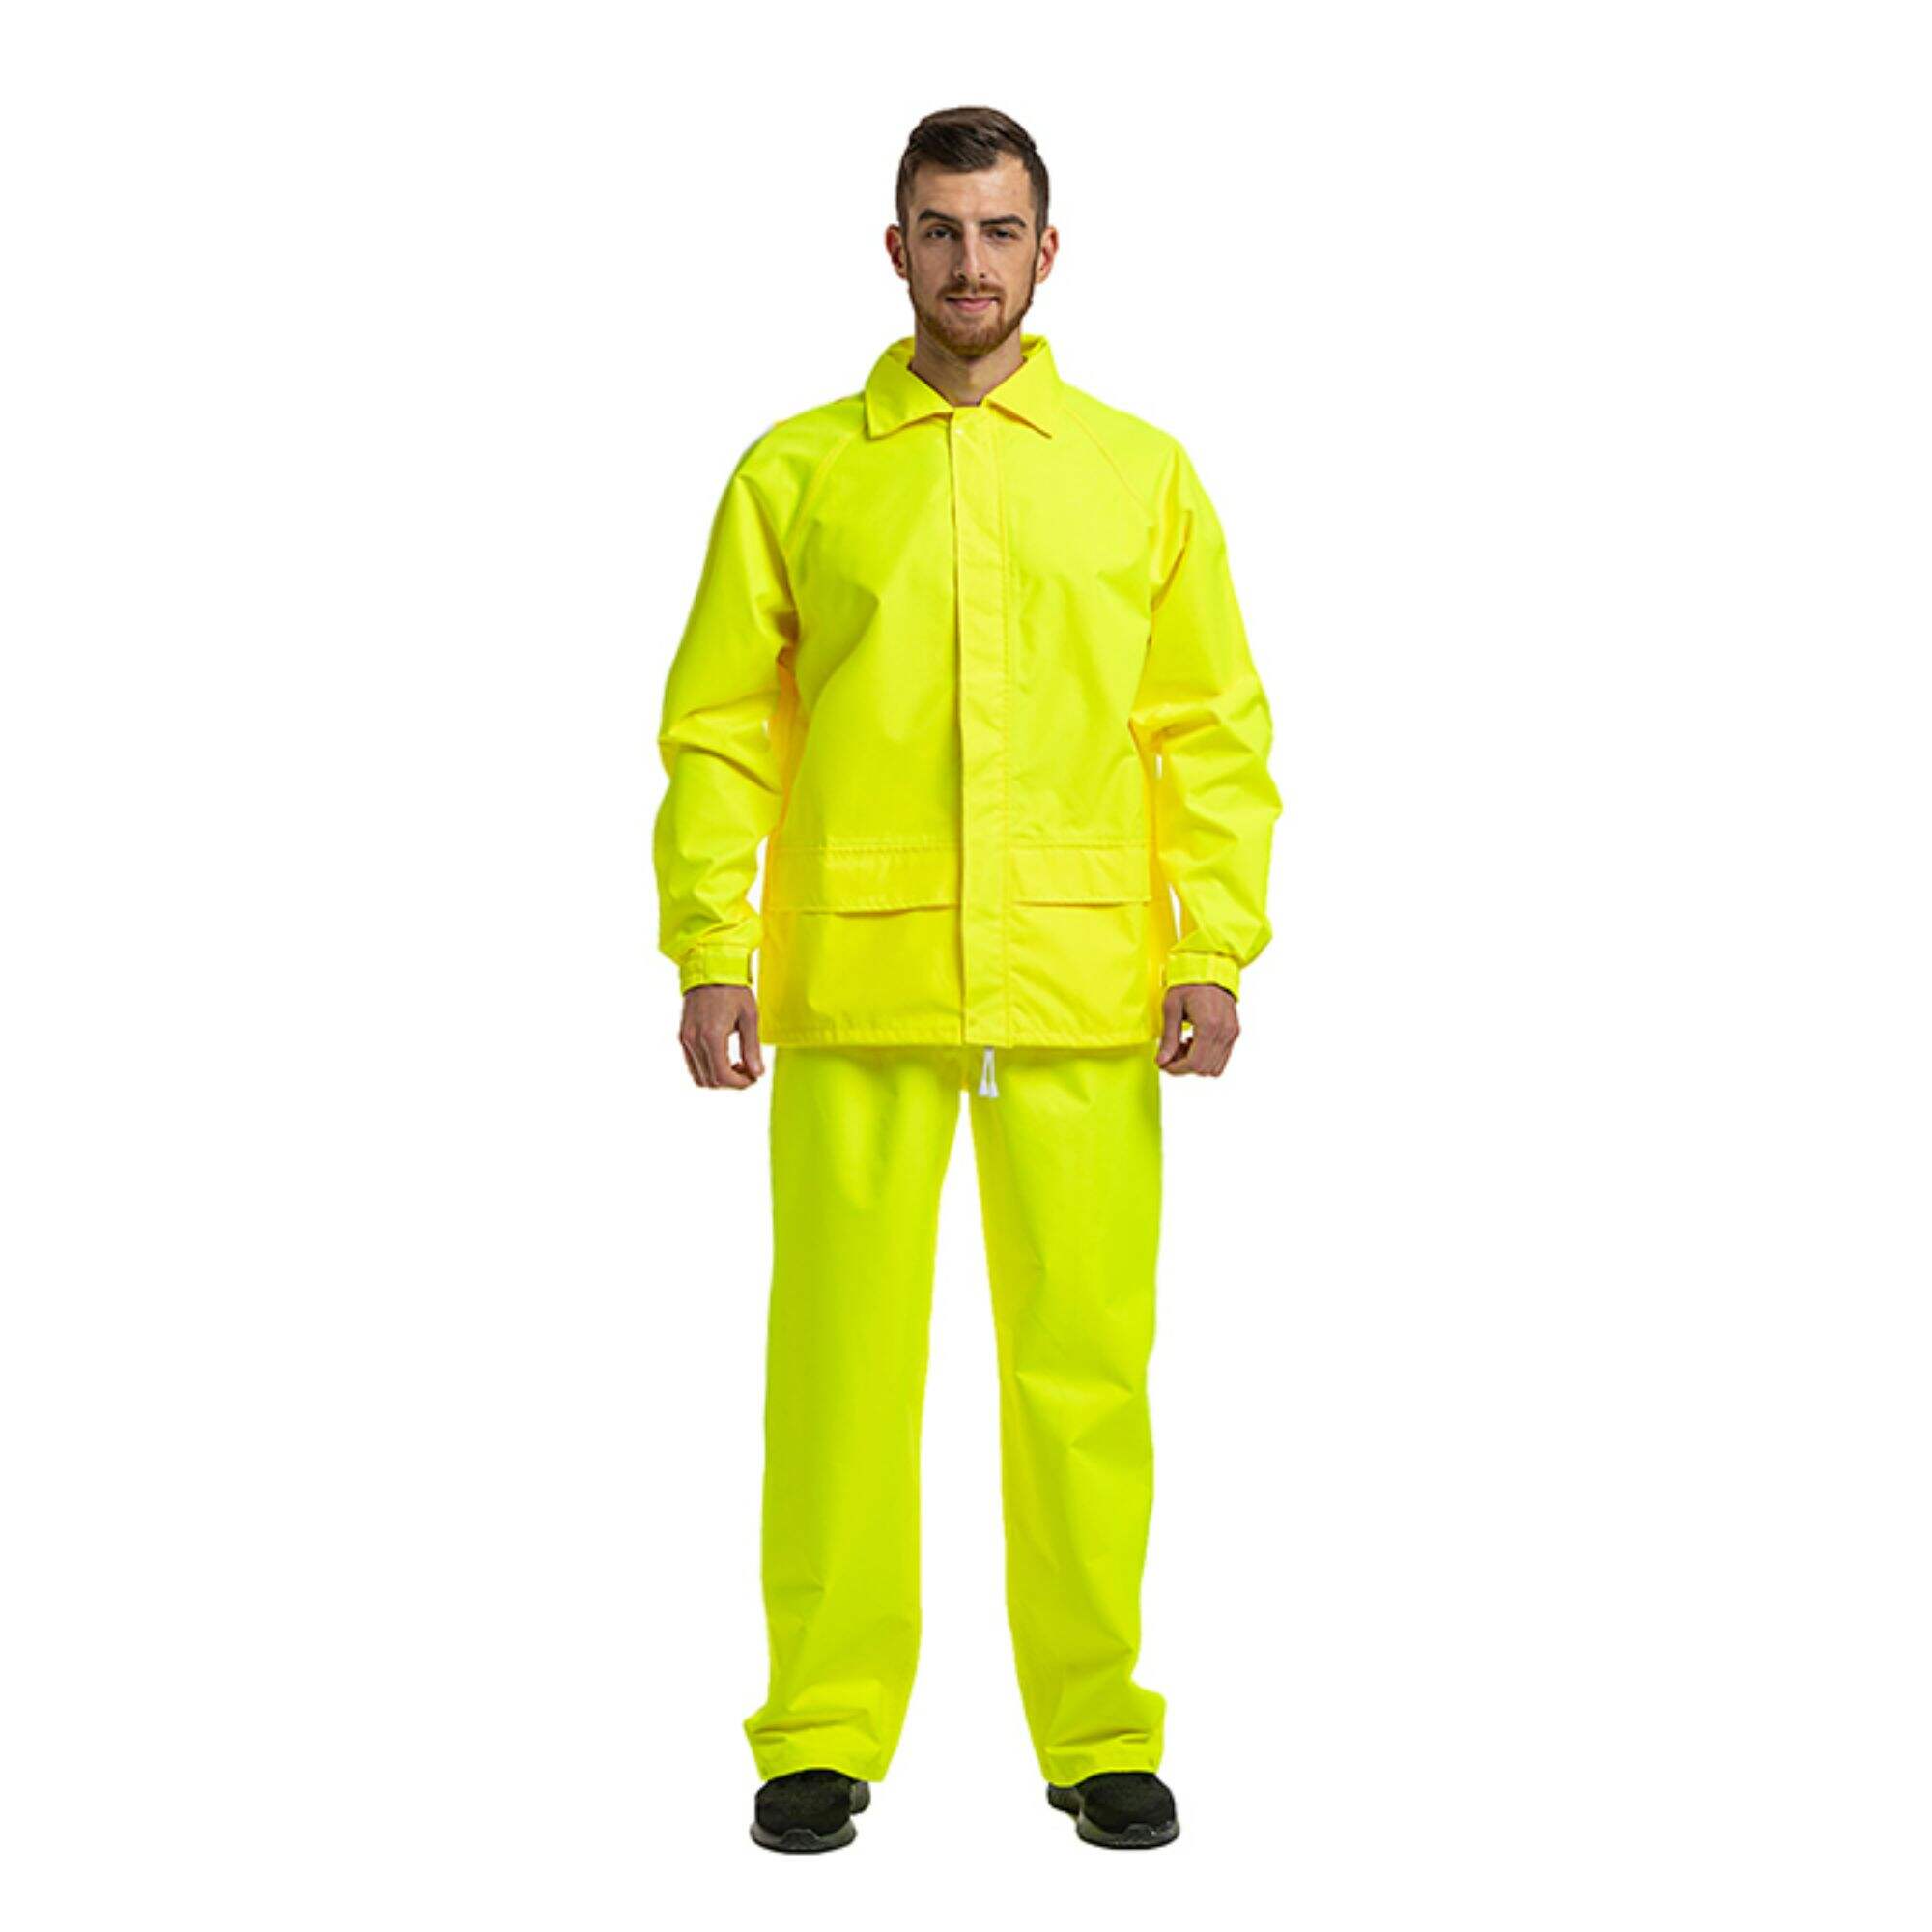 Factory Supply Hi Vis Reflective Reusable Fashionable Waterproof Raincoat Construction Safety Work High Quality Suit